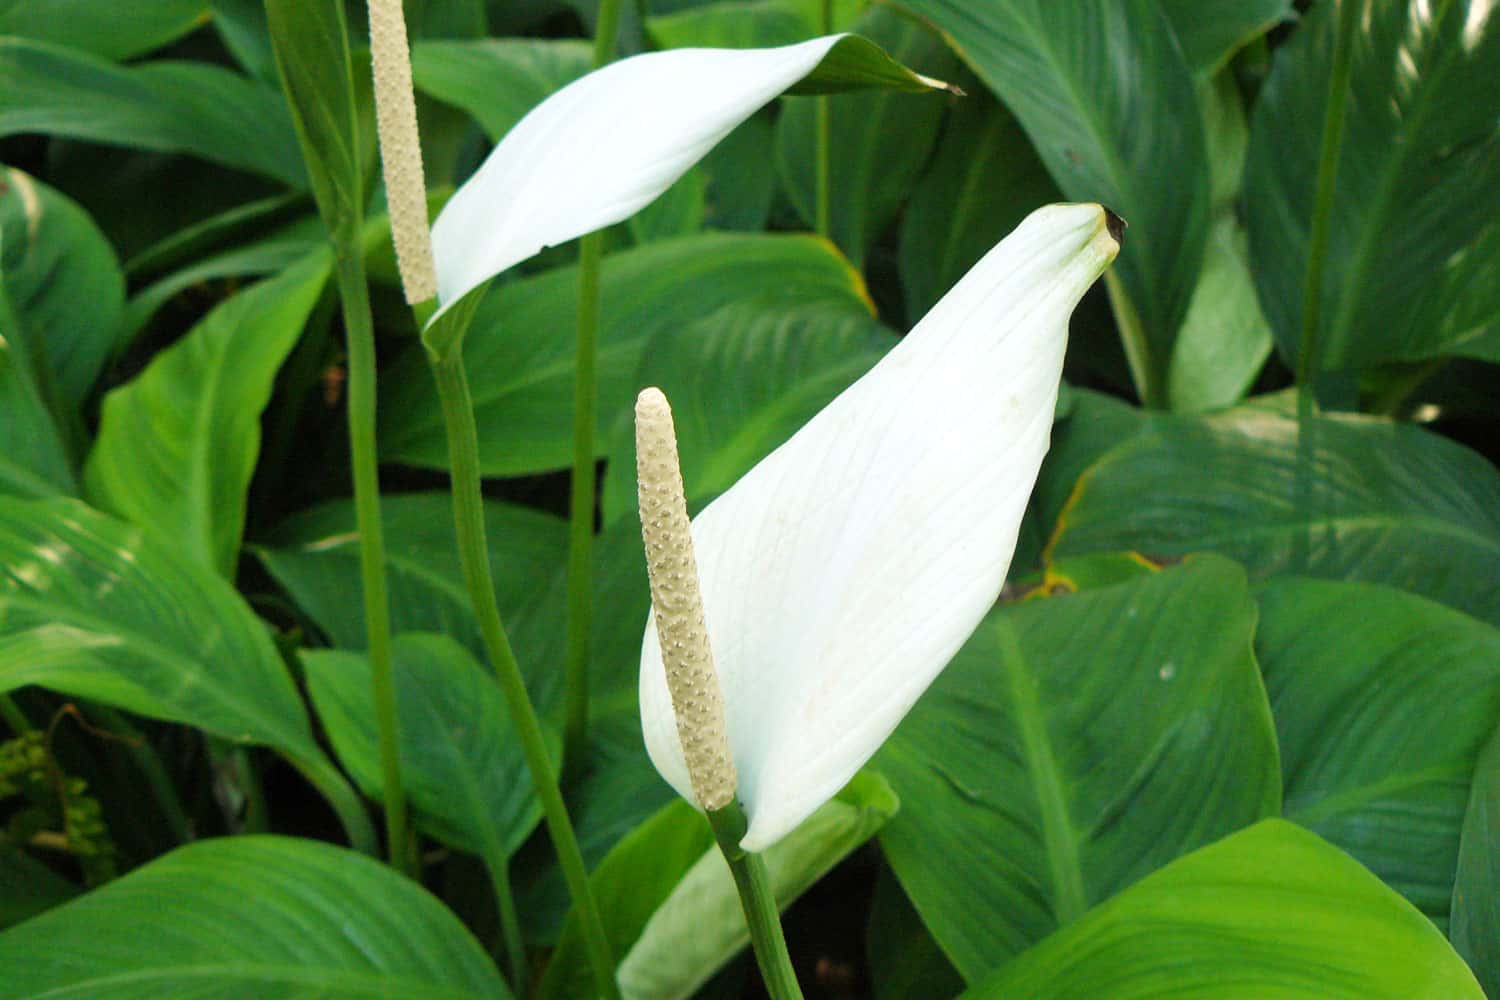 Blooming white flowers of a sensation peace lily